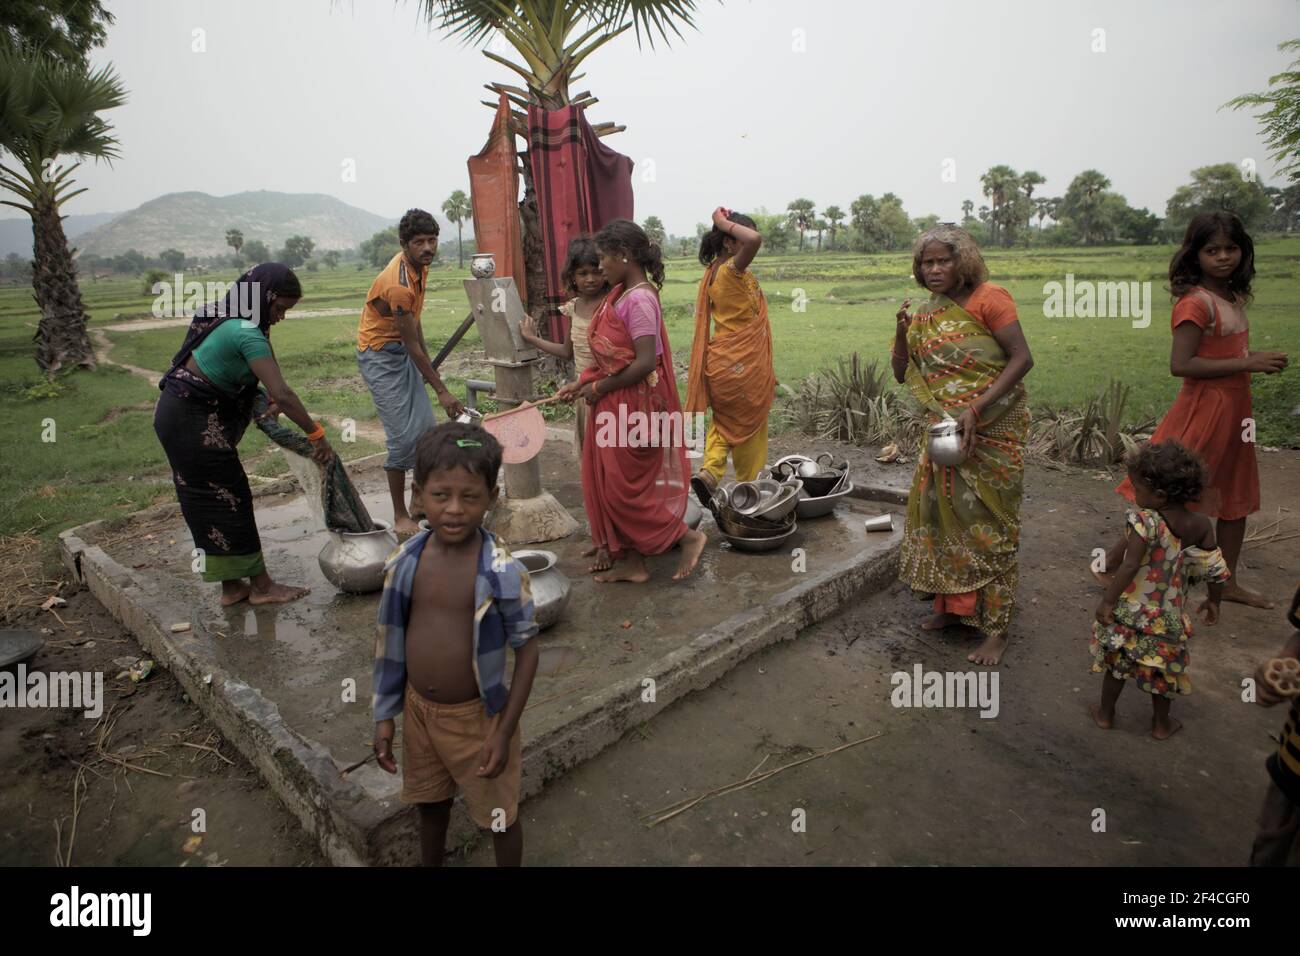 Villagers taking water from a communal water pump in Faldu village near Nalanda in Bihar, India. Since 2015, water-use efficiency has increased by 4% globally, according to UN Water in their Summary Progress Update 2021 published on March 1, 2021 in Geneva. Stock Photo